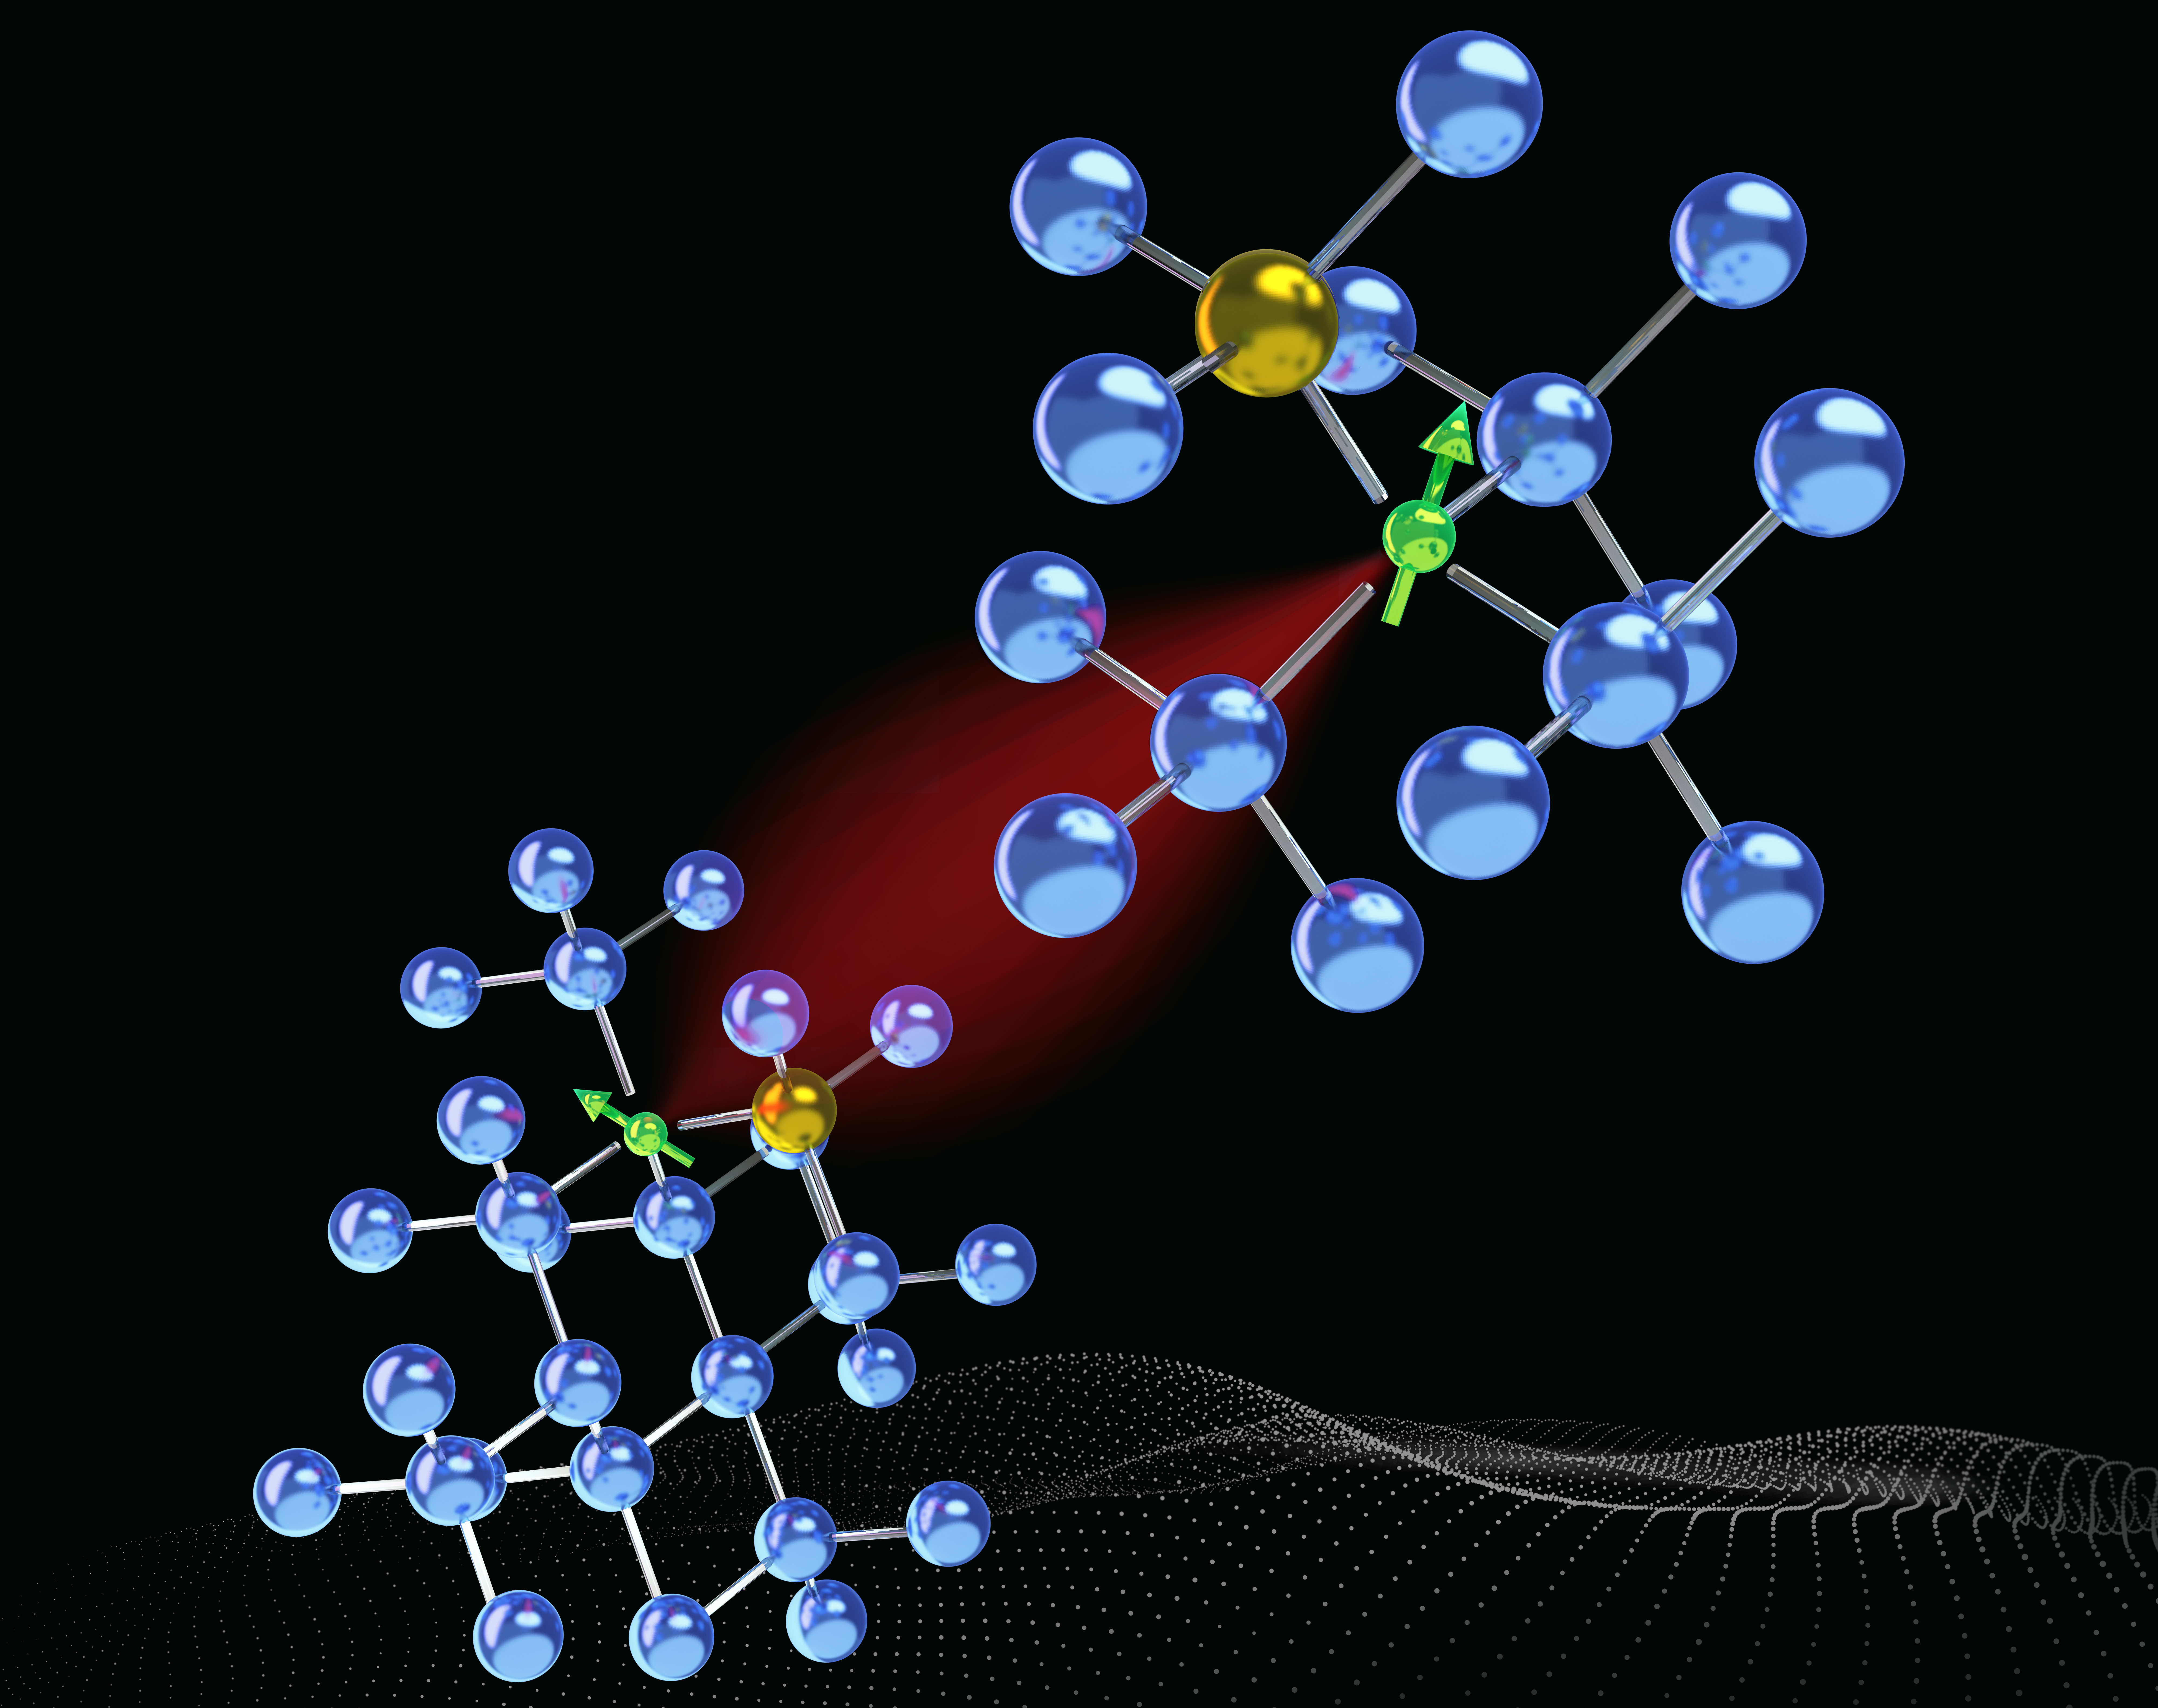 chematic representation of two diamond crystals with nitrogen vacancy centers